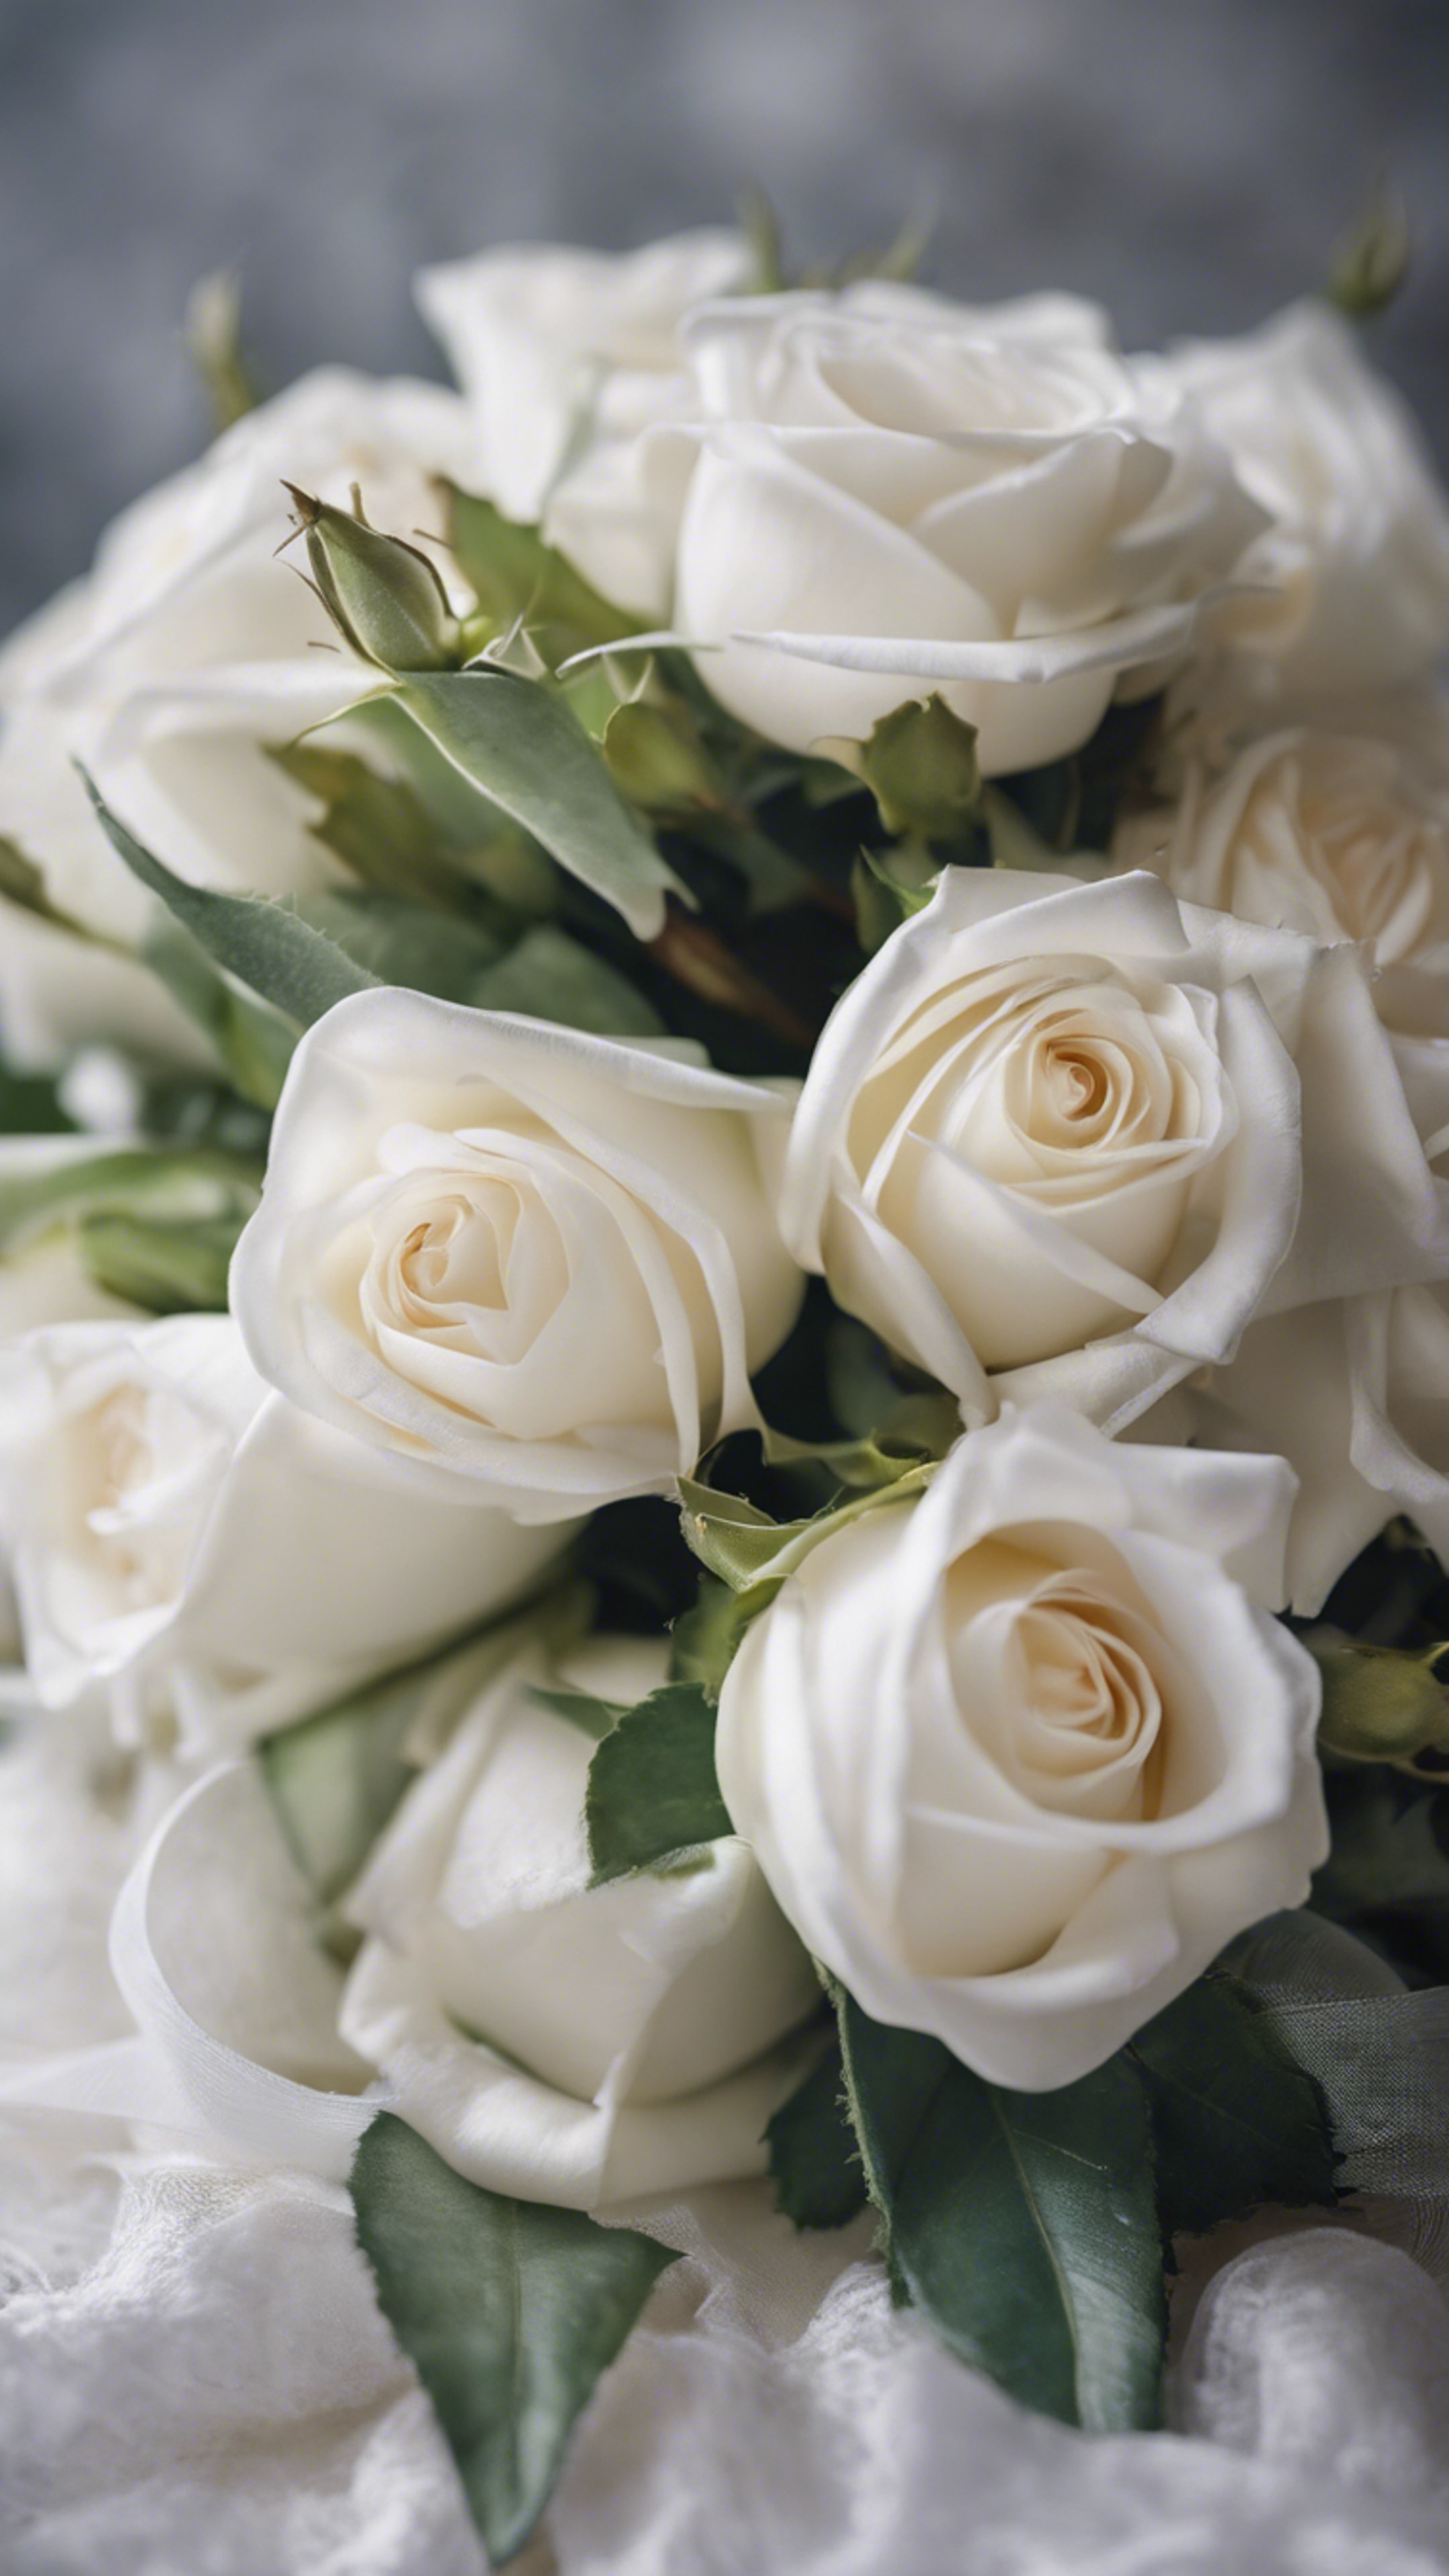 A bouquet of white roses wrapped in sheer white satin ribbon. Ფონი[5223d8c249ea42cfaf4b]